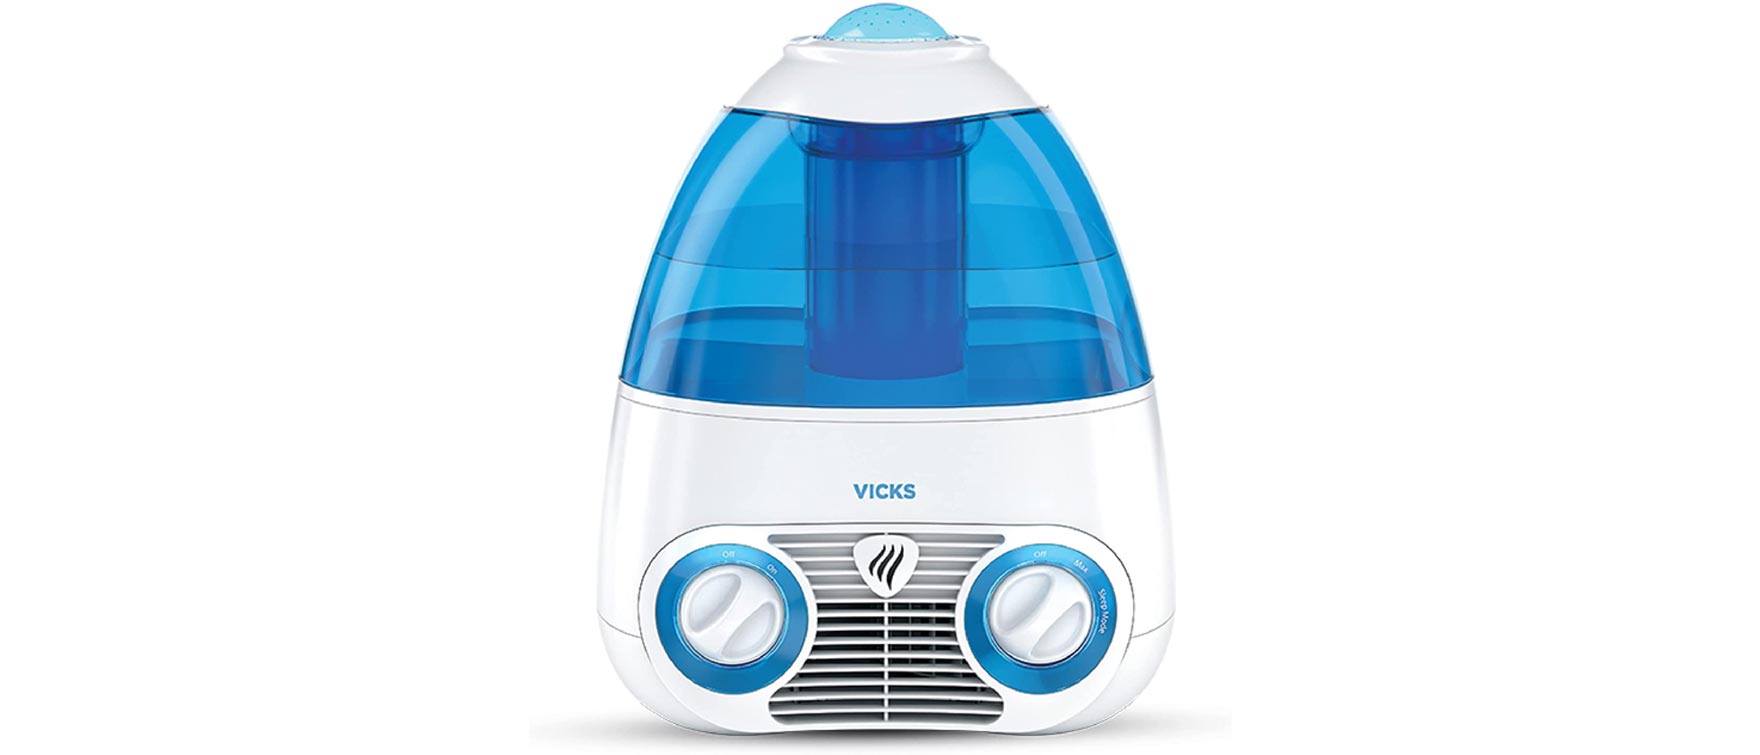 5. Vicks Starry Night Filtered Cool Mist Humidifier